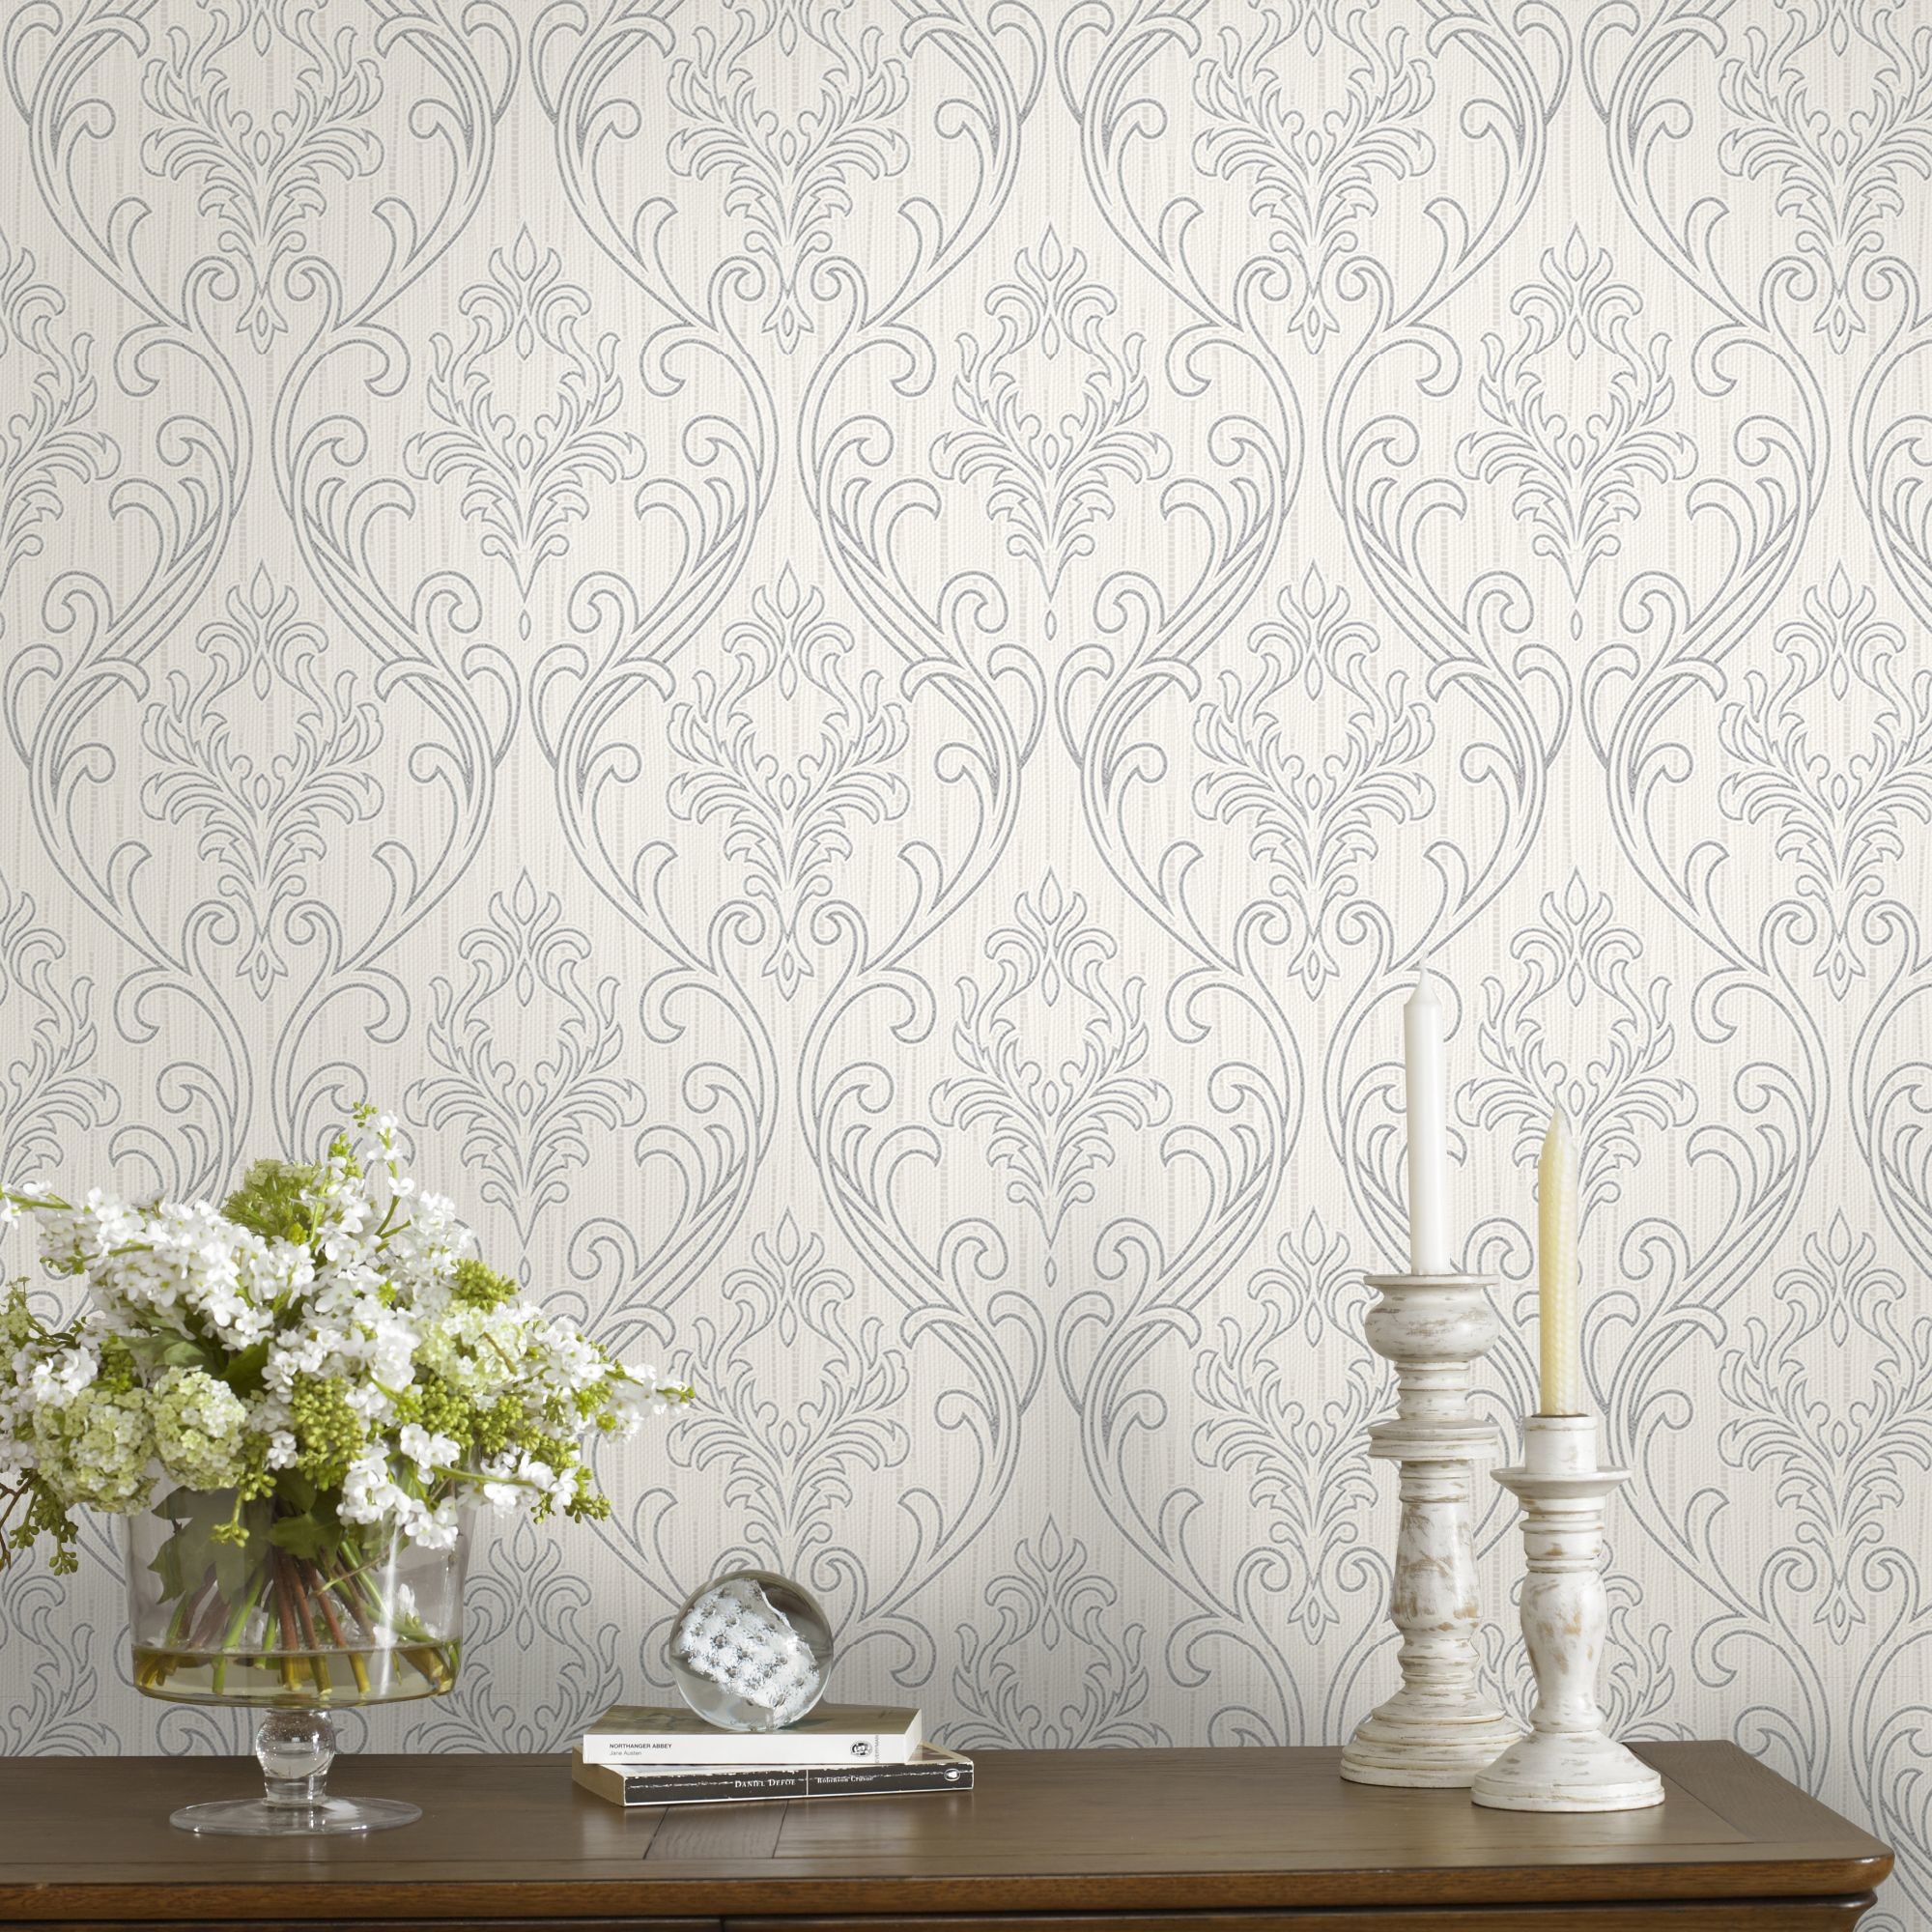 2000x2000 Details about Superfresco Royale Glitter Textured Damask Silver/White  Wallpaper 20-940